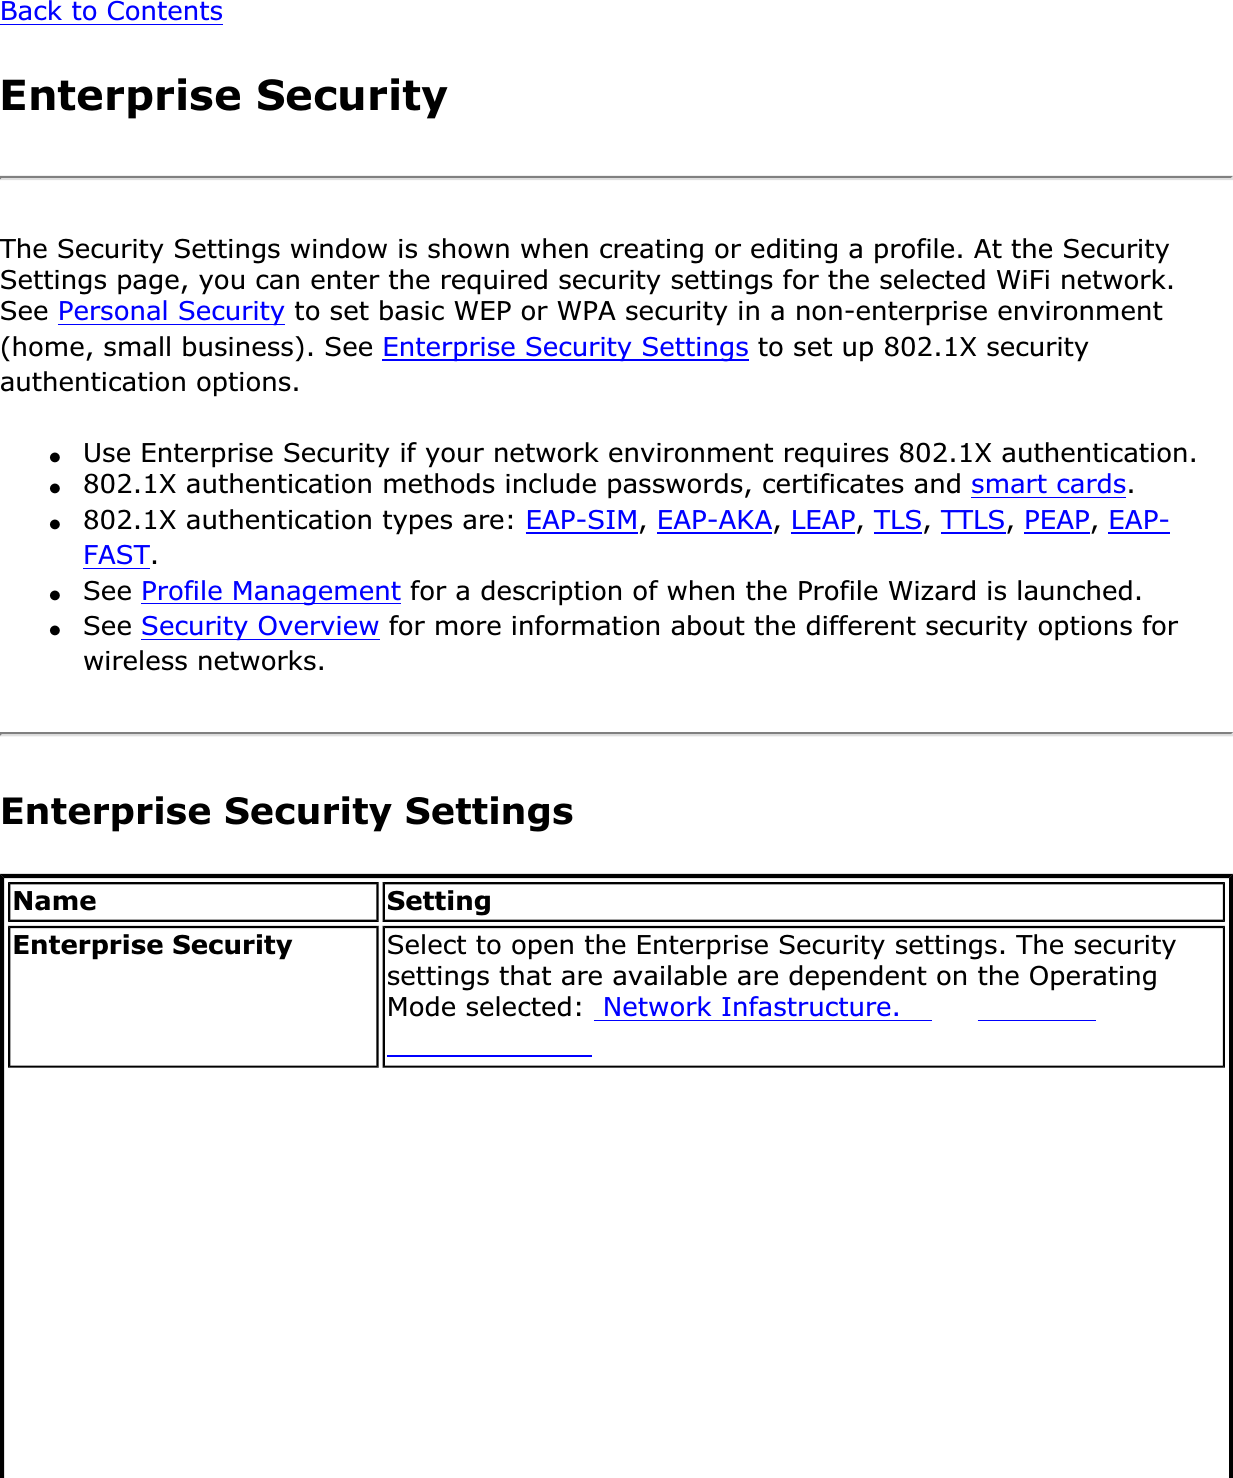 Back to ContentsEnterprise SecurityThe Security Settings window is shown when creating or editing a profile. At the Security Settings page, you can enter the required security settings for the selected WiFi network. See Personal Security to set basic WEP or WPA security in a non-enterprise environment (home, small business). See Enterprise Security Settings to set up 802.1X security authentication options.●Use Enterprise Security if your network environment requires 802.1X authentication.●802.1X authentication methods include passwords, certificates and smart cards.●802.1X authentication types are: EAP-SIM,EAP-AKA,LEAP,TLS,TTLS,PEAP,EAP-FAST.●See Profile Management for a description of when the Profile Wizard is launched.●See Security Overview for more information about the different security options for wireless networks.Enterprise Security SettingsName SettingEnterprise Security Select to open the Enterprise Security settings. The security settings that are available are dependent on the Operating Mode selected:  Network Infastructure.